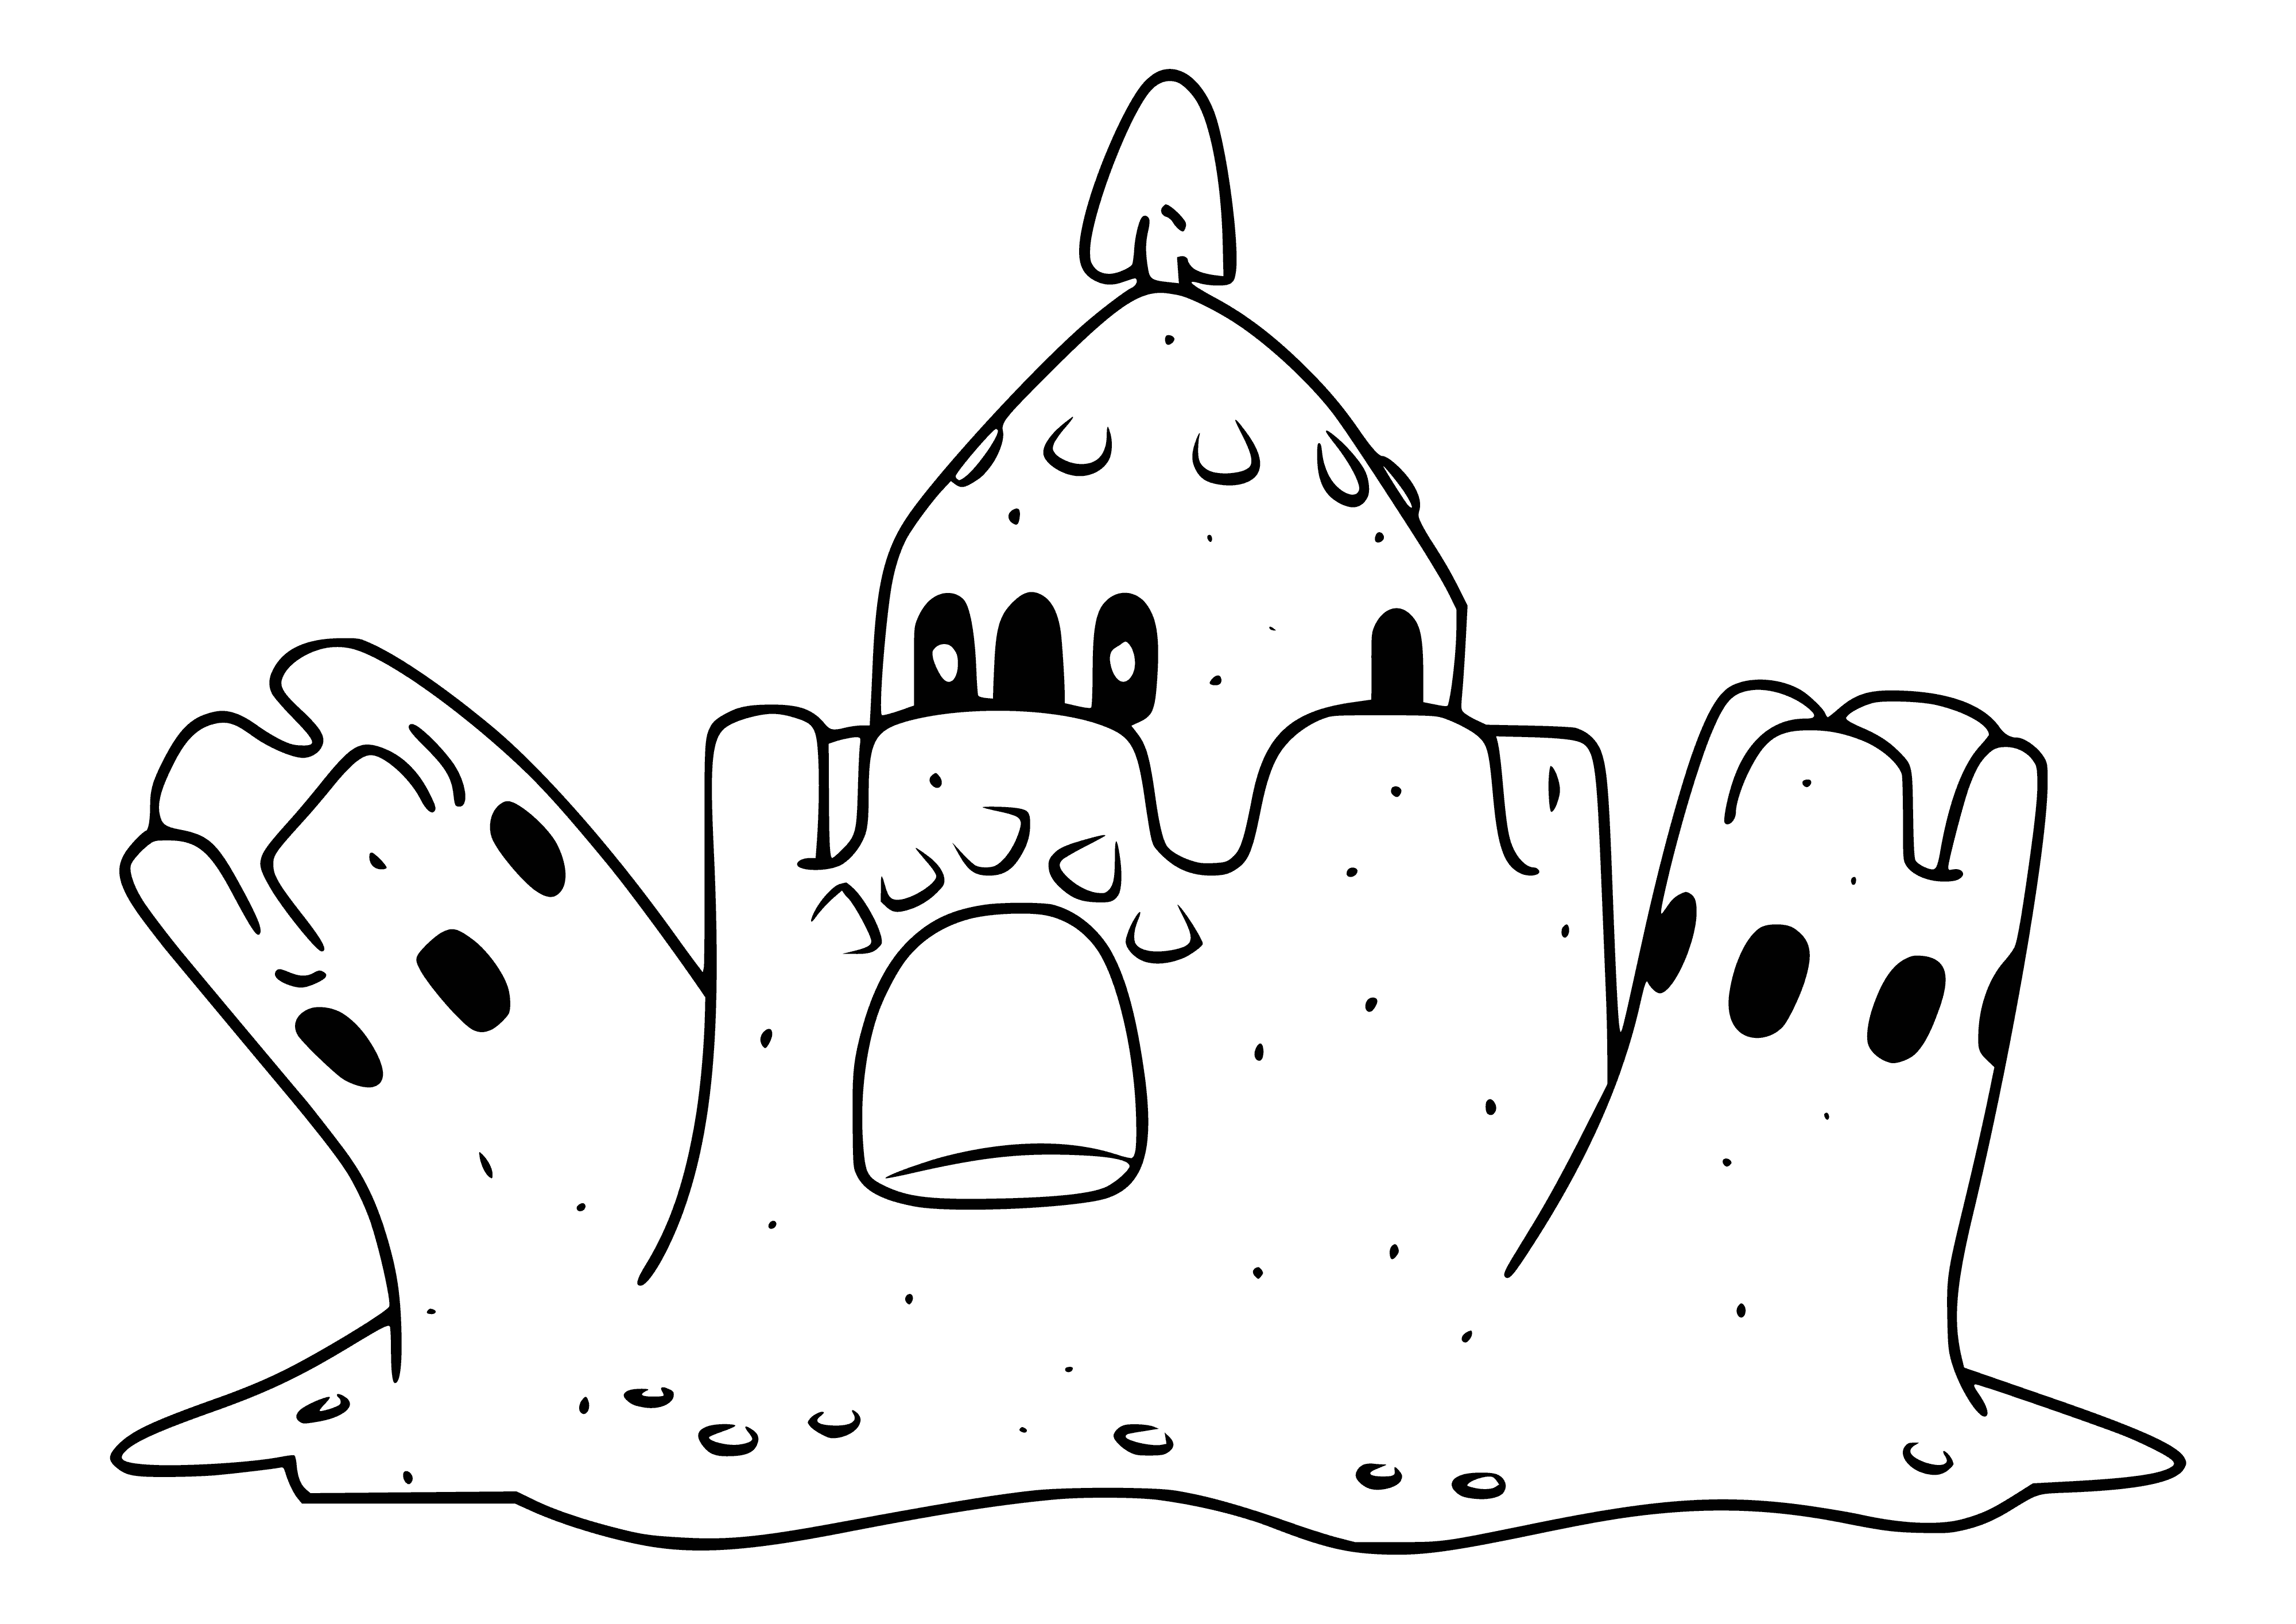 coloring page: Sandcastle Pokémon w/ dark head, red eyes, white body, arms, legs and red jewel on forehead.